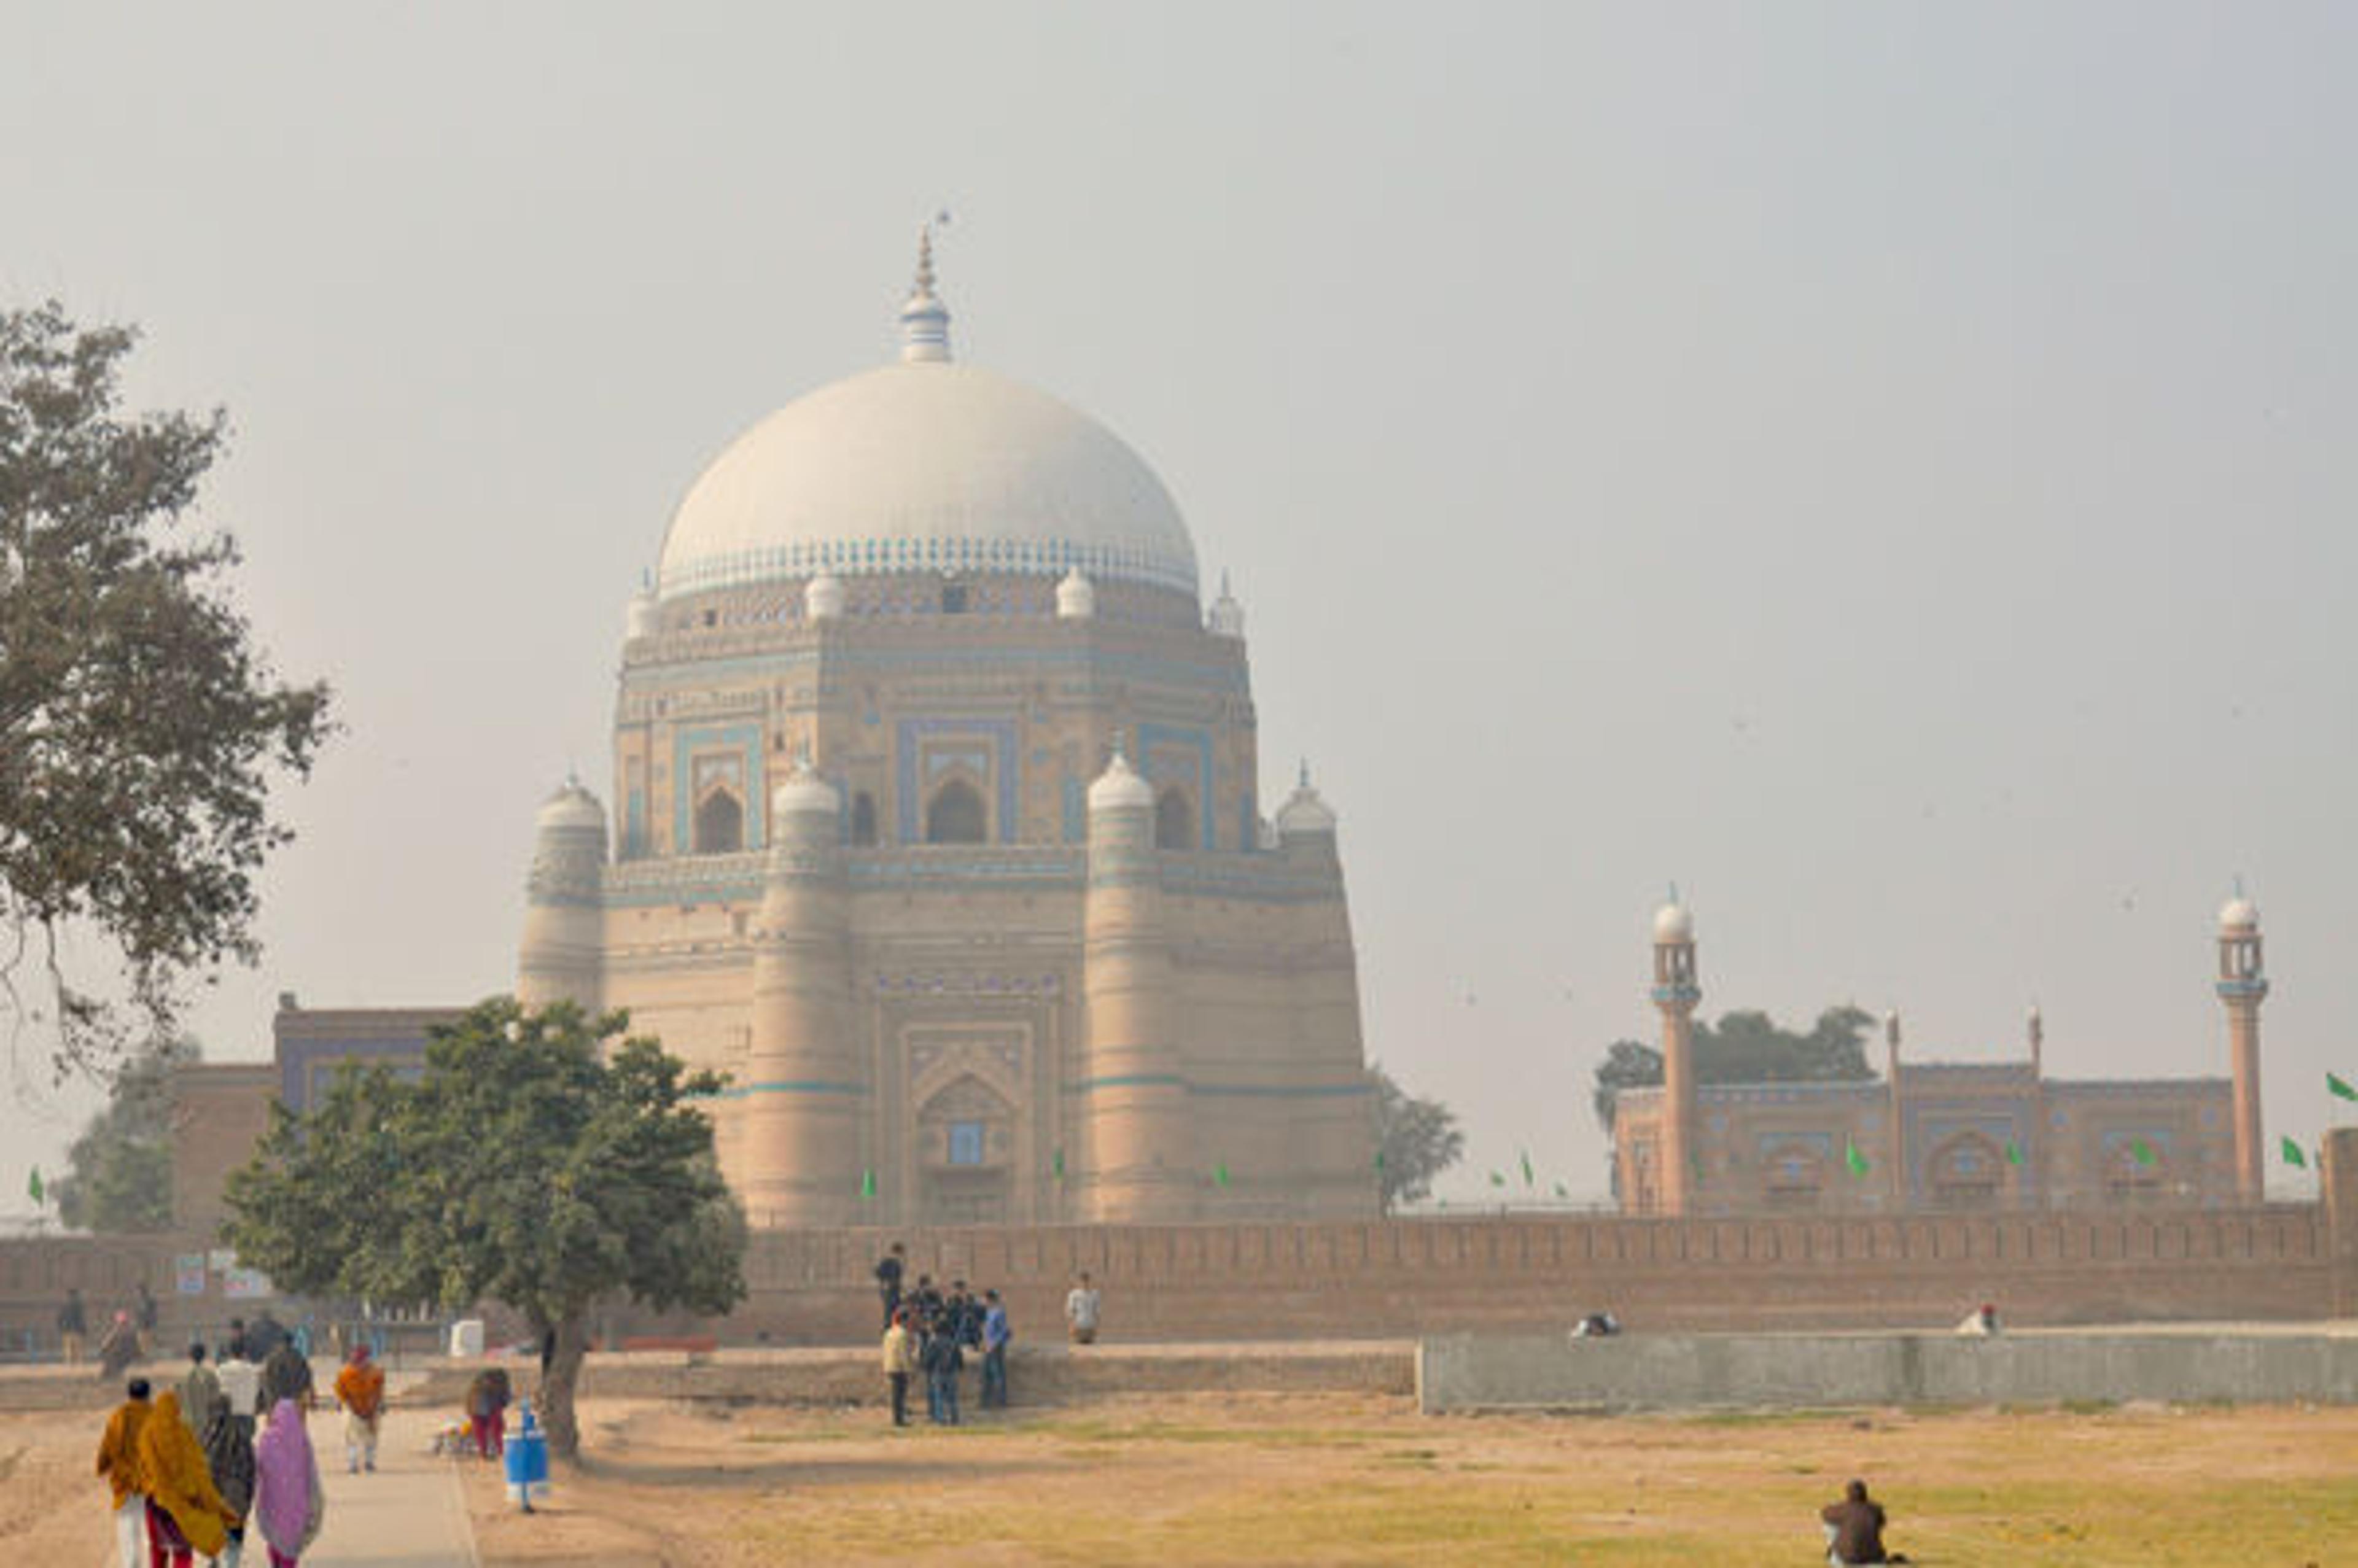 The Tomb of Rukn-e-Alam. Photograph courtesy of the author